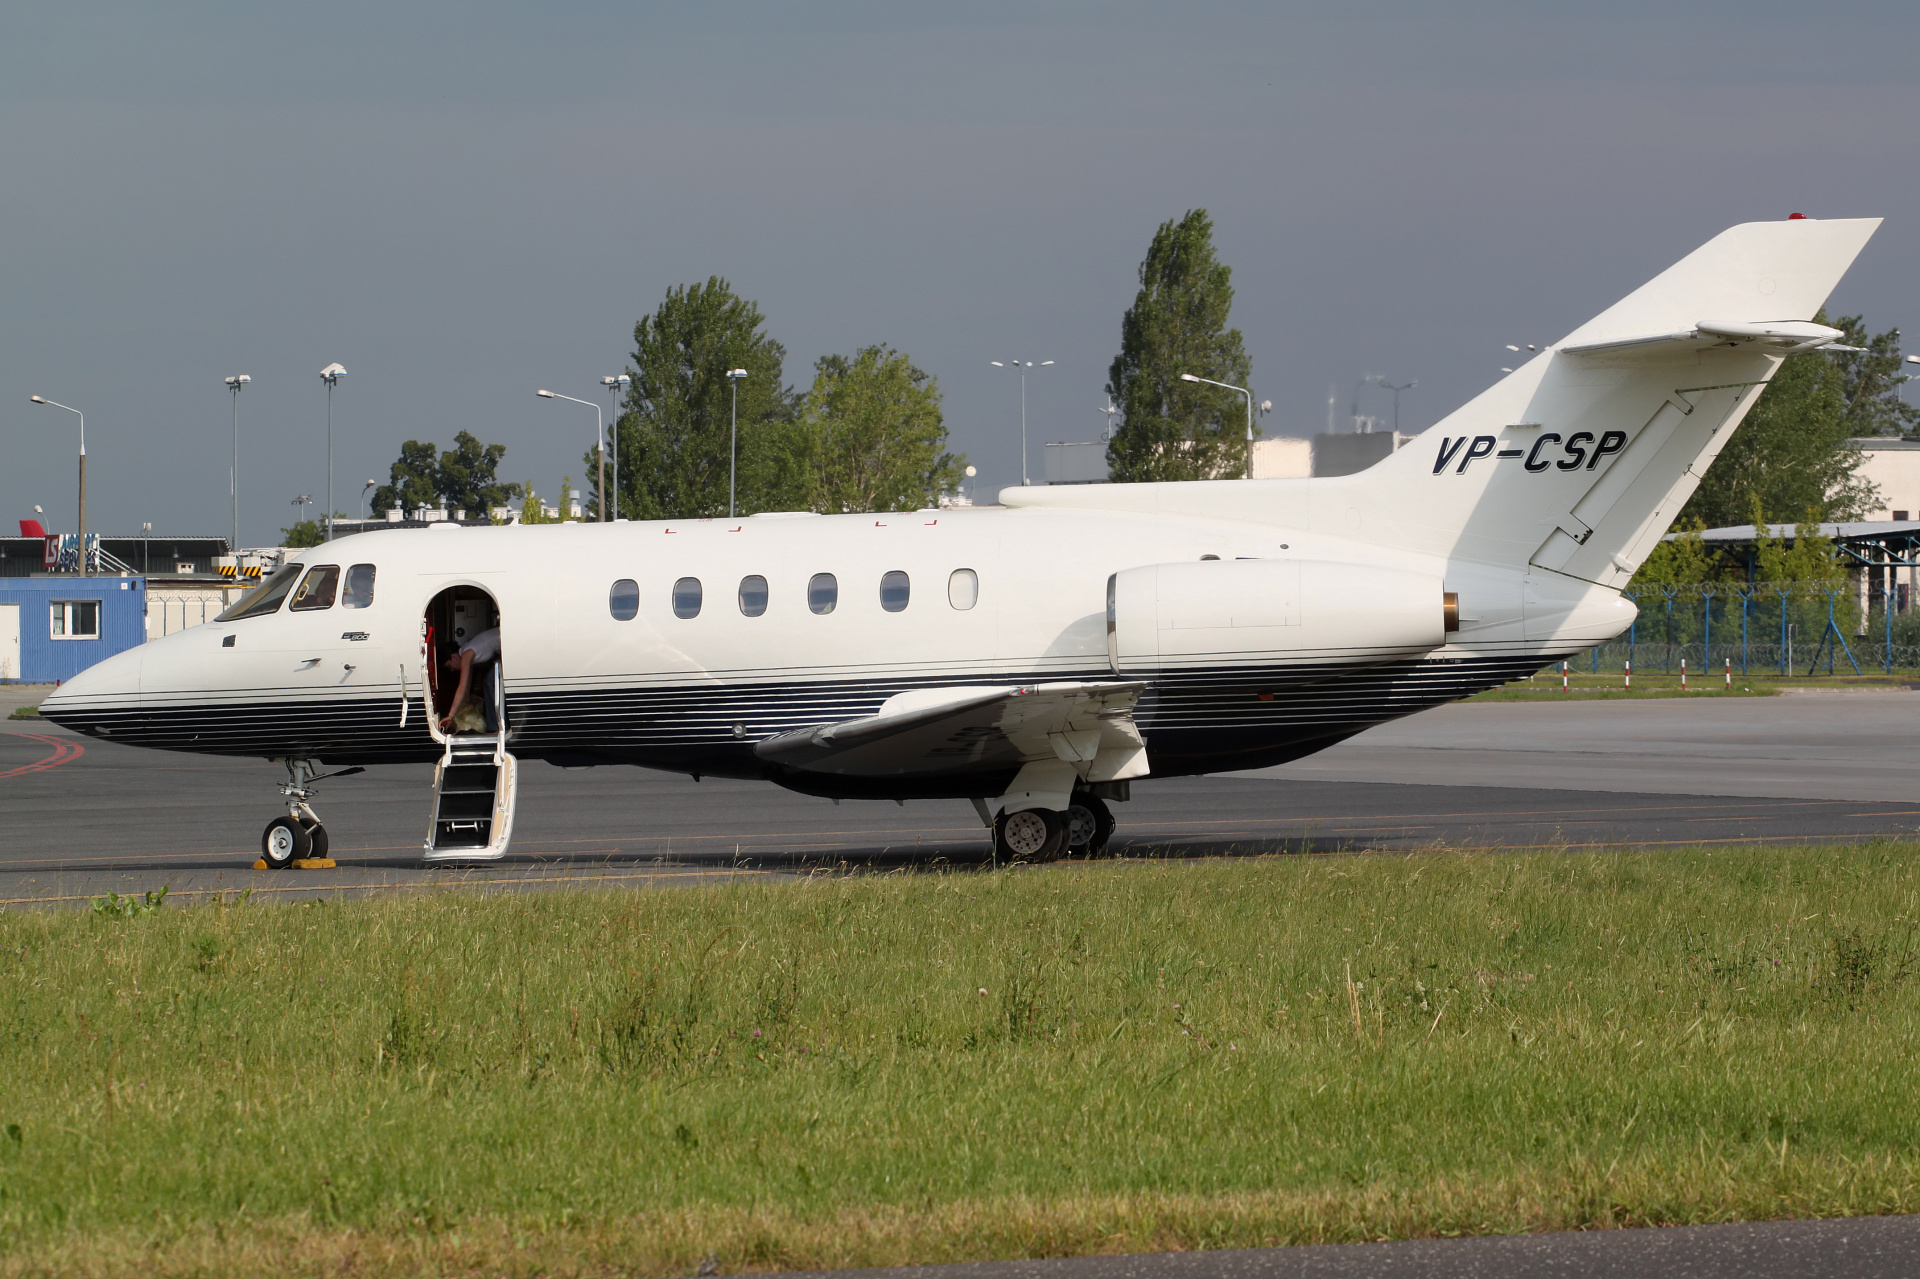 125-800, VP-CSP, Springline (Aircraft » EPWA Spotting » BAe 125 and revisions)